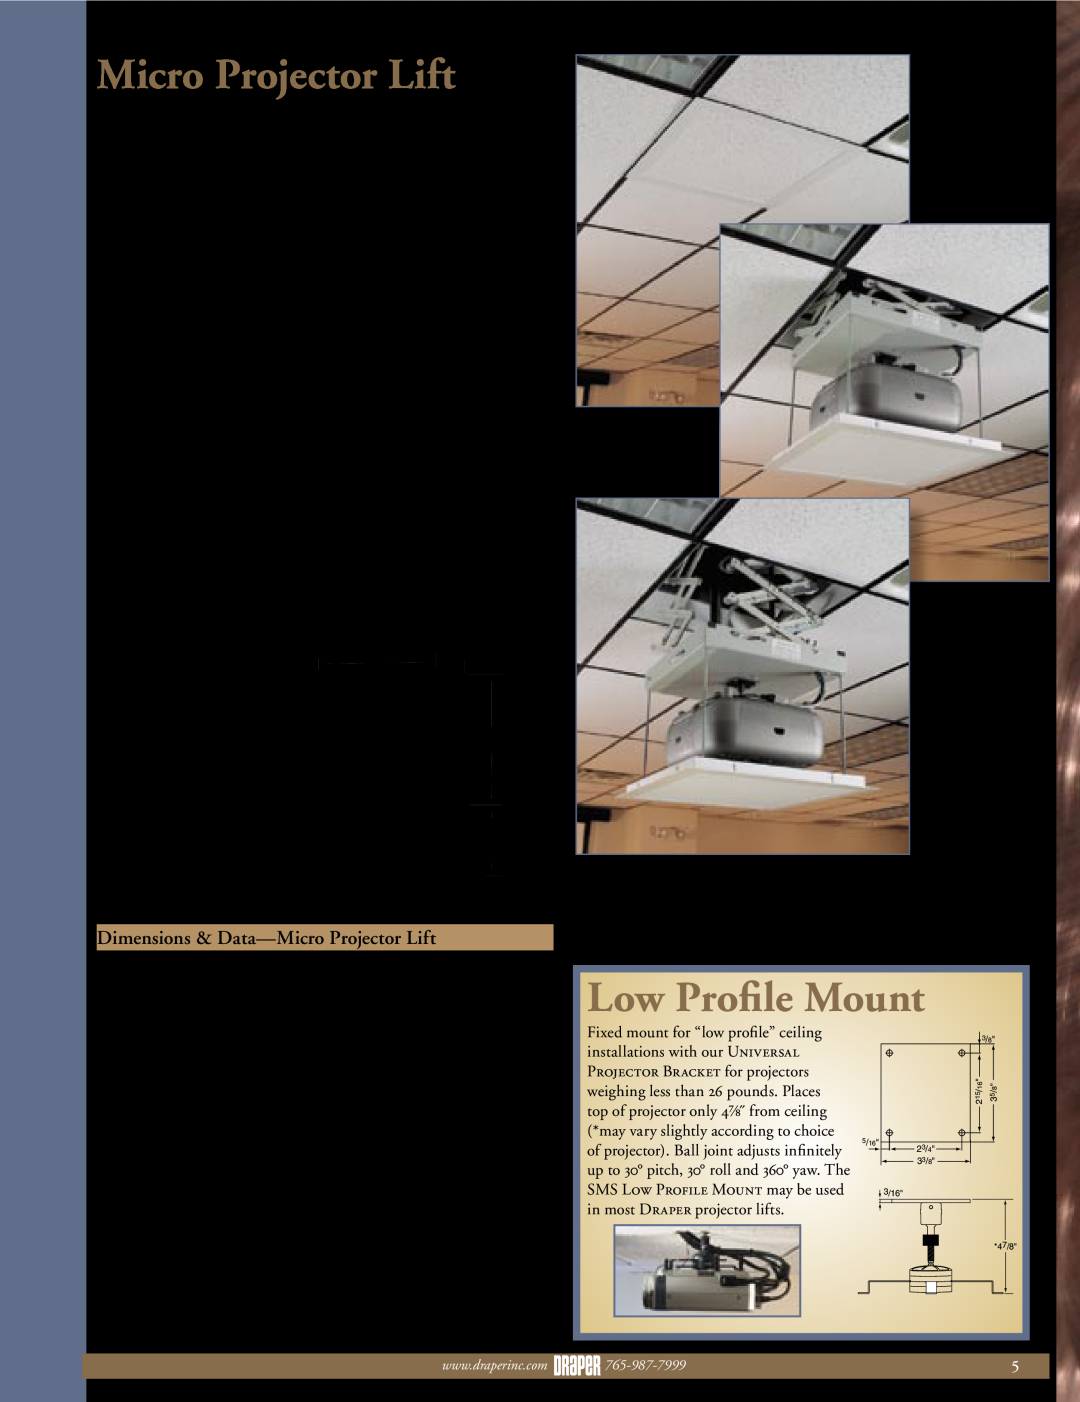 Draper Micro Projector Lift dimensions Low Proﬁle Mount, Designed for today’s smaller projectors, System Options 